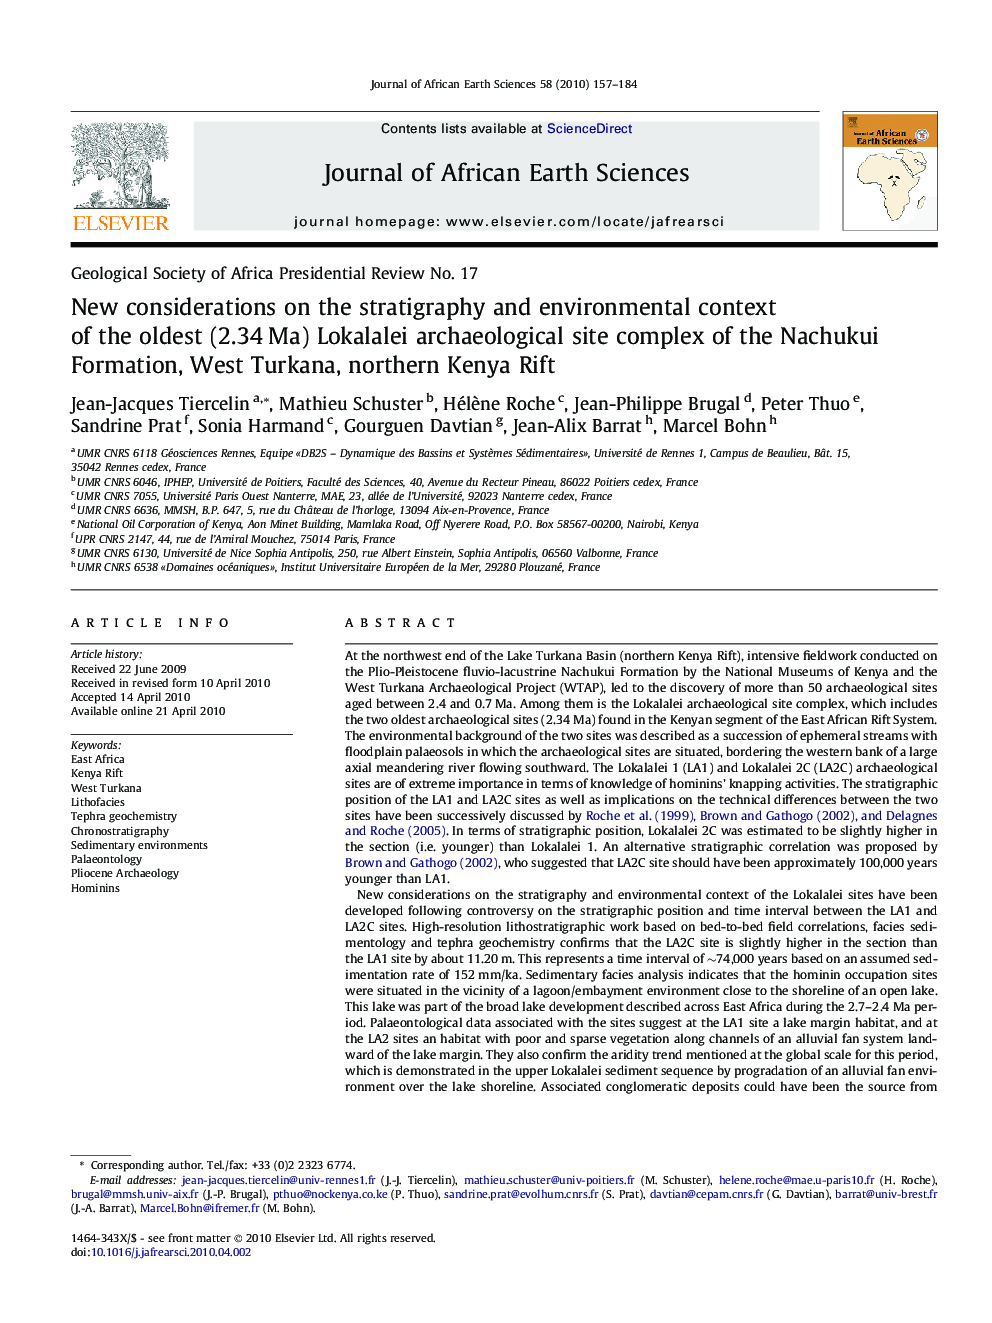 New considerations on the stratigraphy and environmental context of the oldest (2.34 Ma) Lokalalei archaeological site complex of the Nachukui Formation, West Turkana, northern Kenya Rift